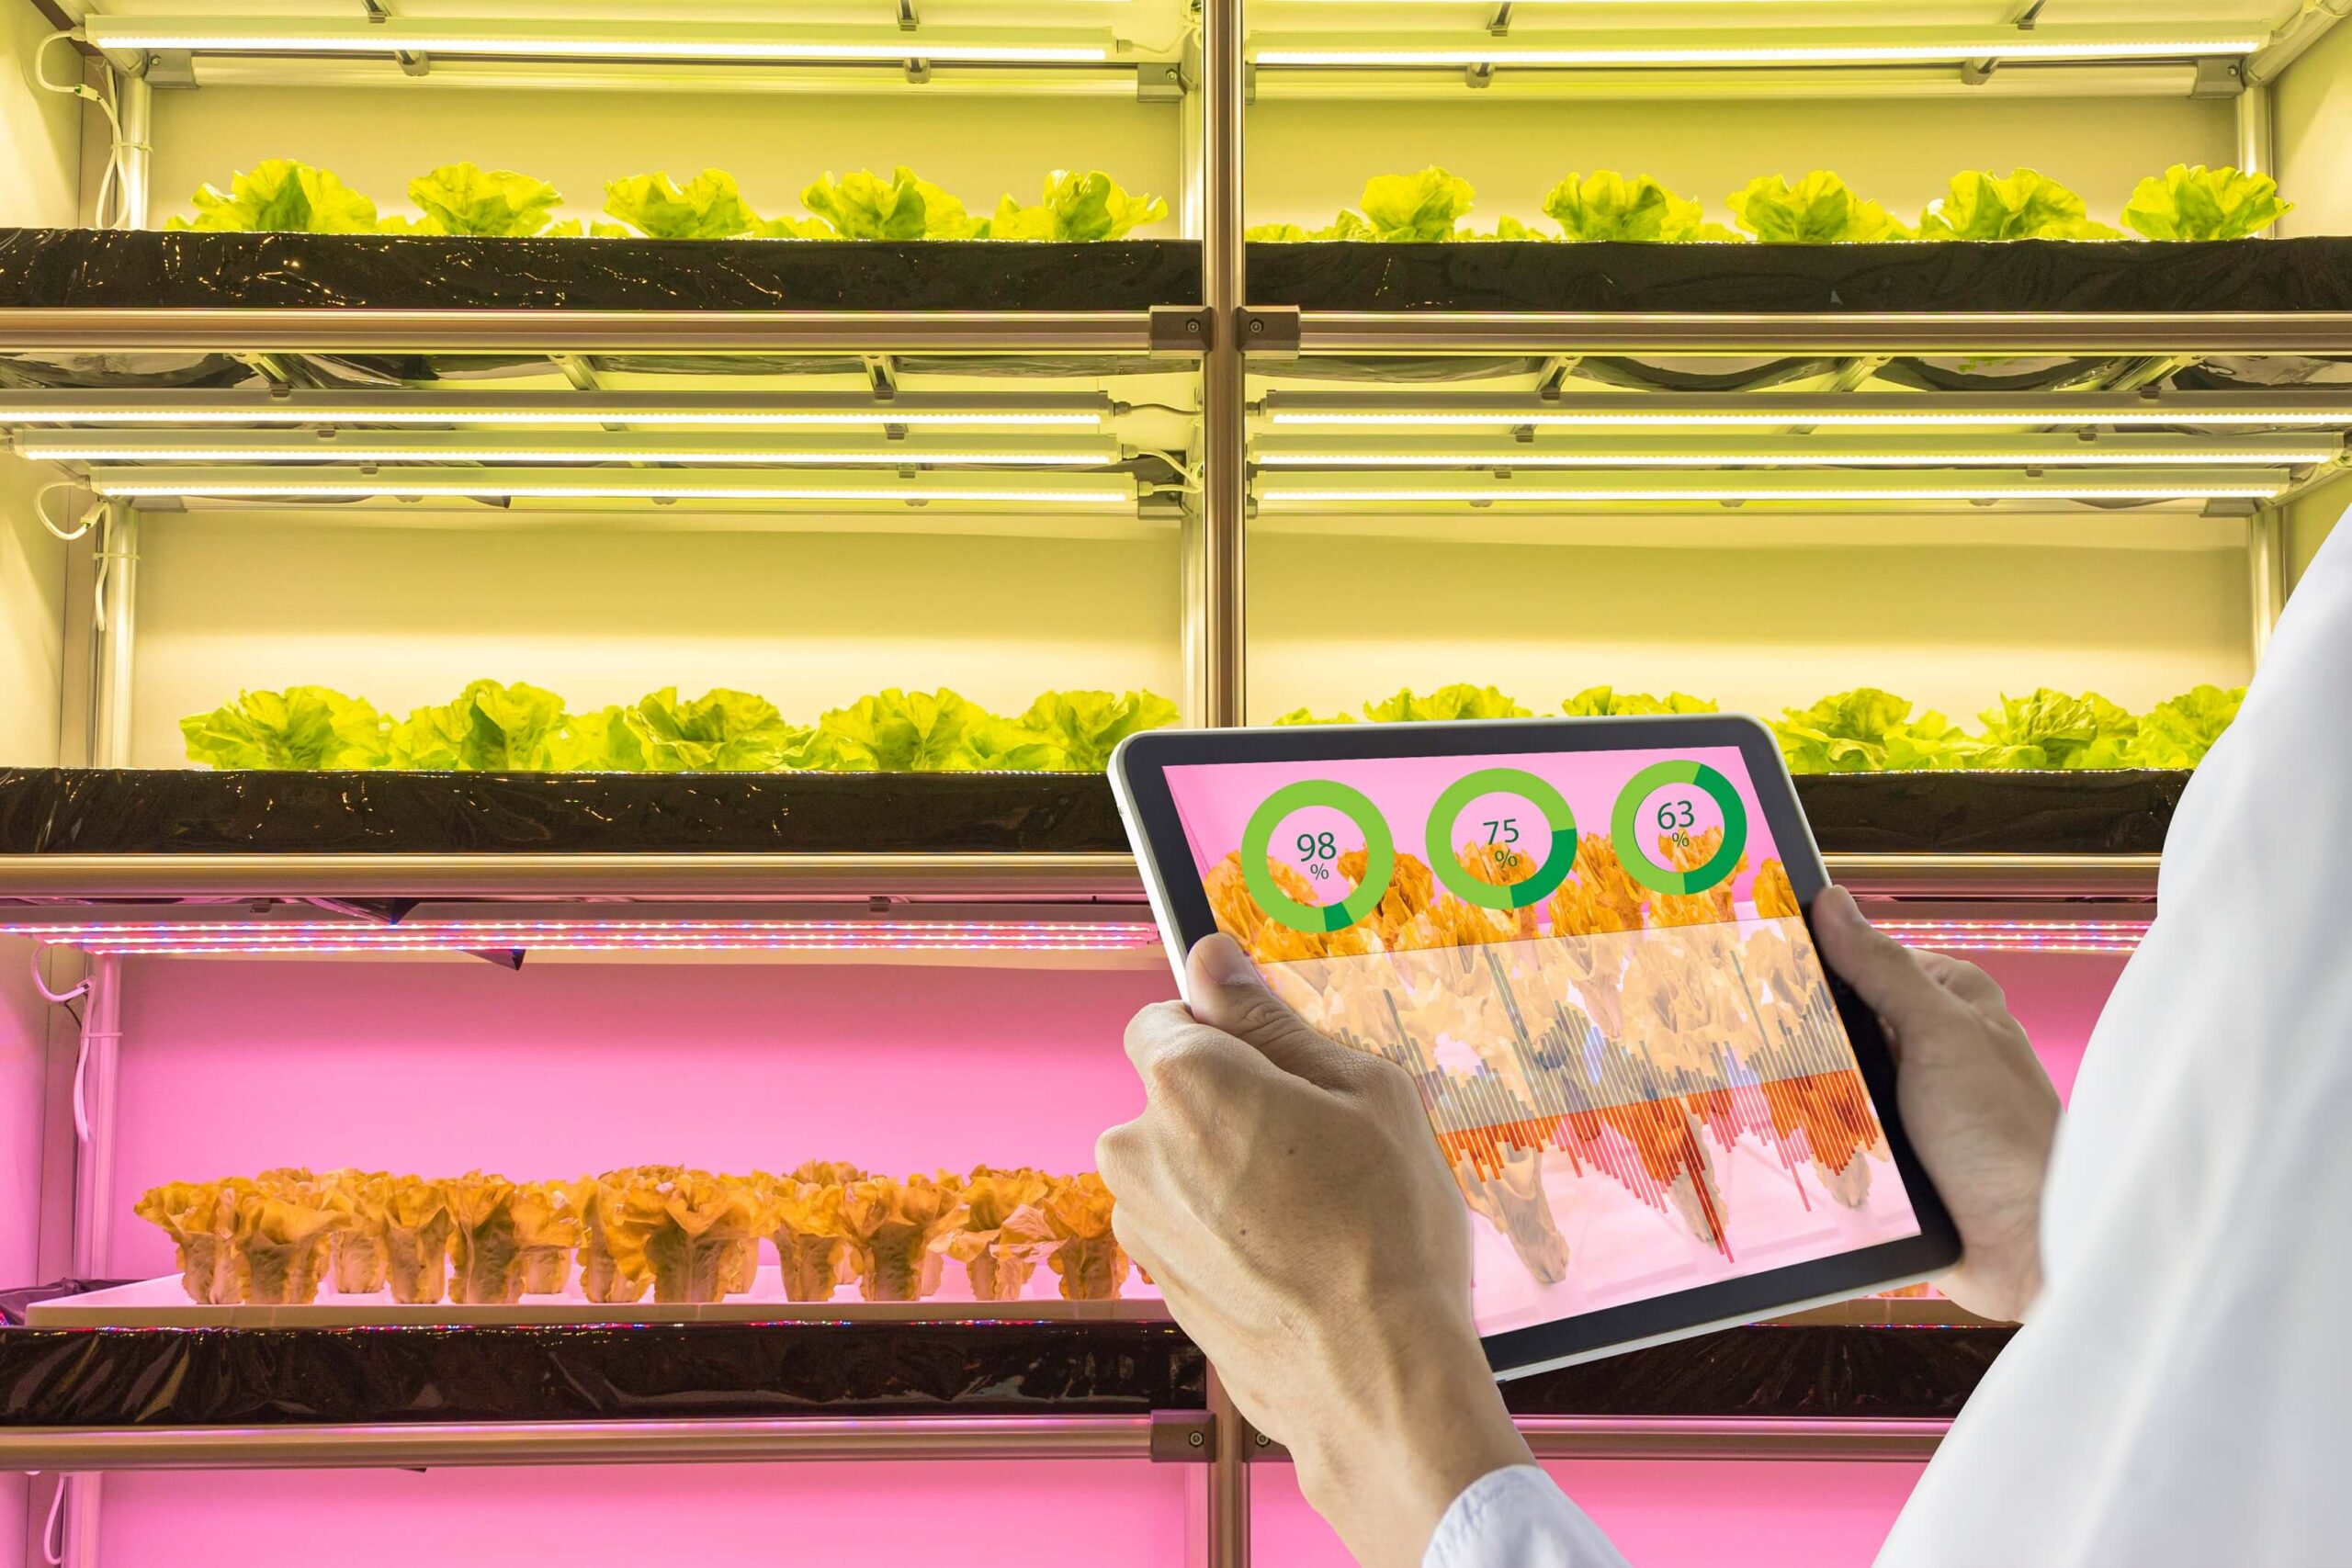 Tips For Setting Up Successful Plant Trials With LED Grow Light